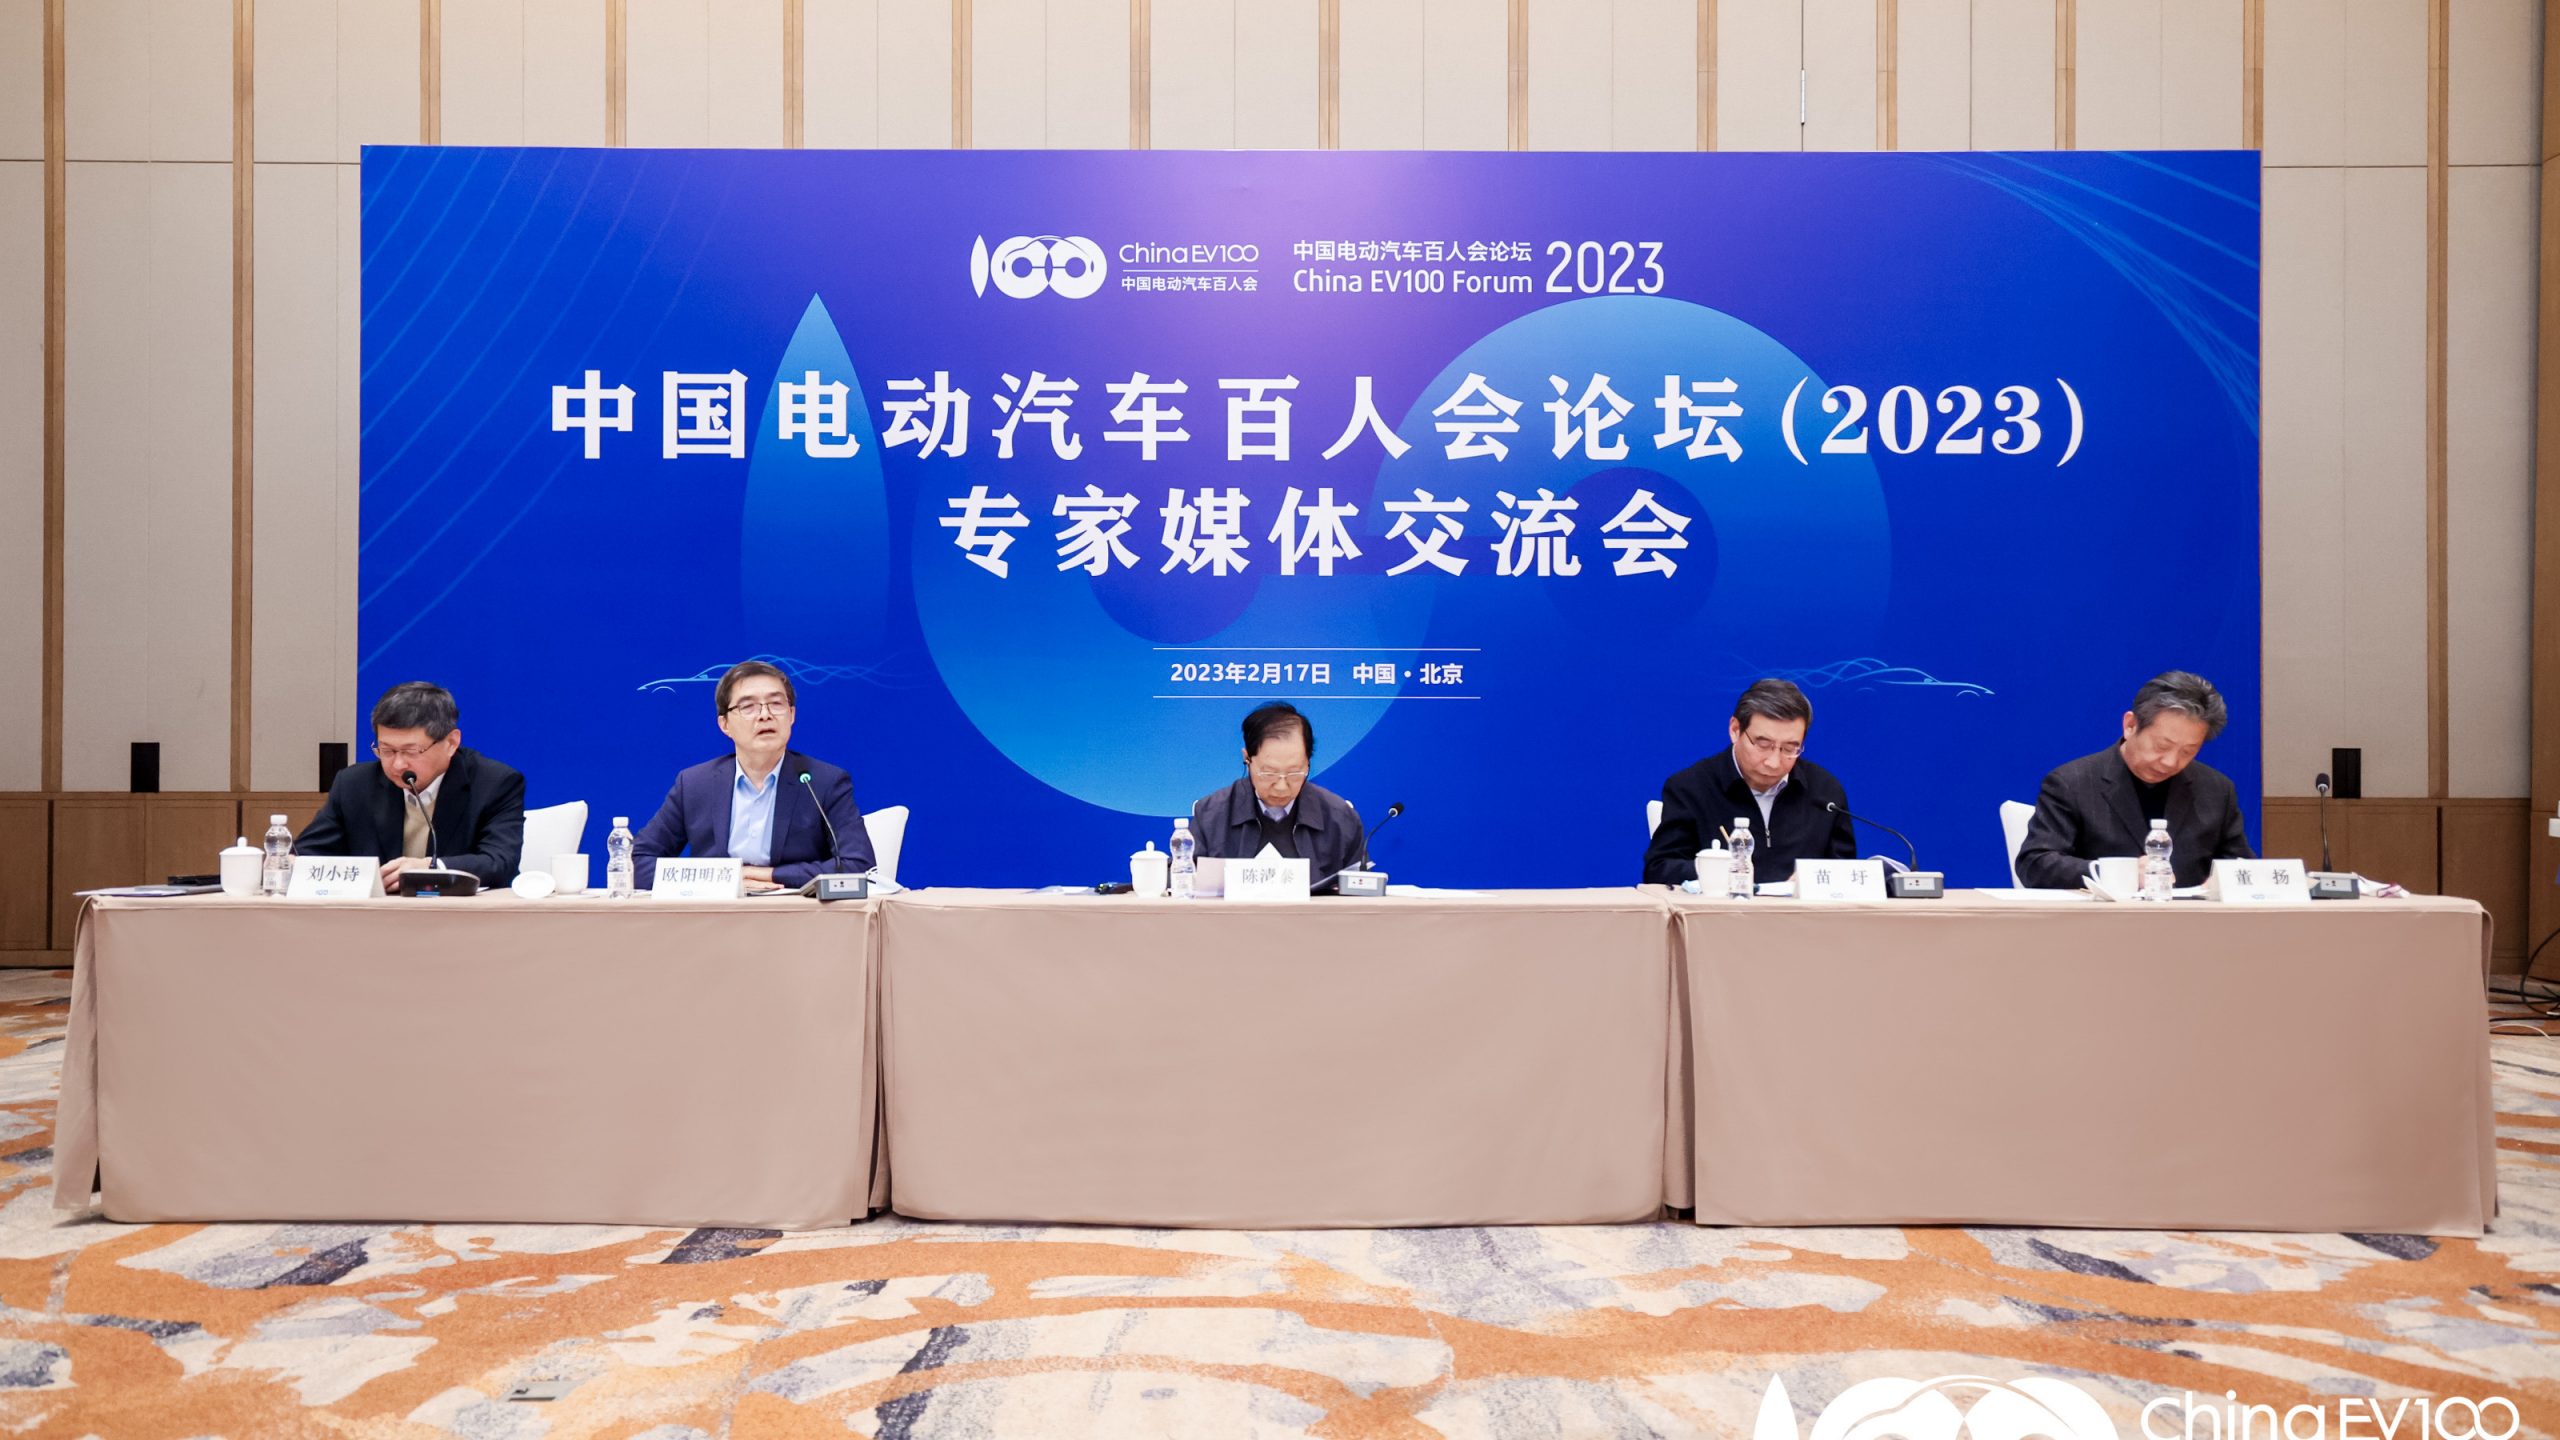 Summary of Q&A section of China Electric Vehicle One Hundred Forum Expert-Media Communication Meeting (2023)